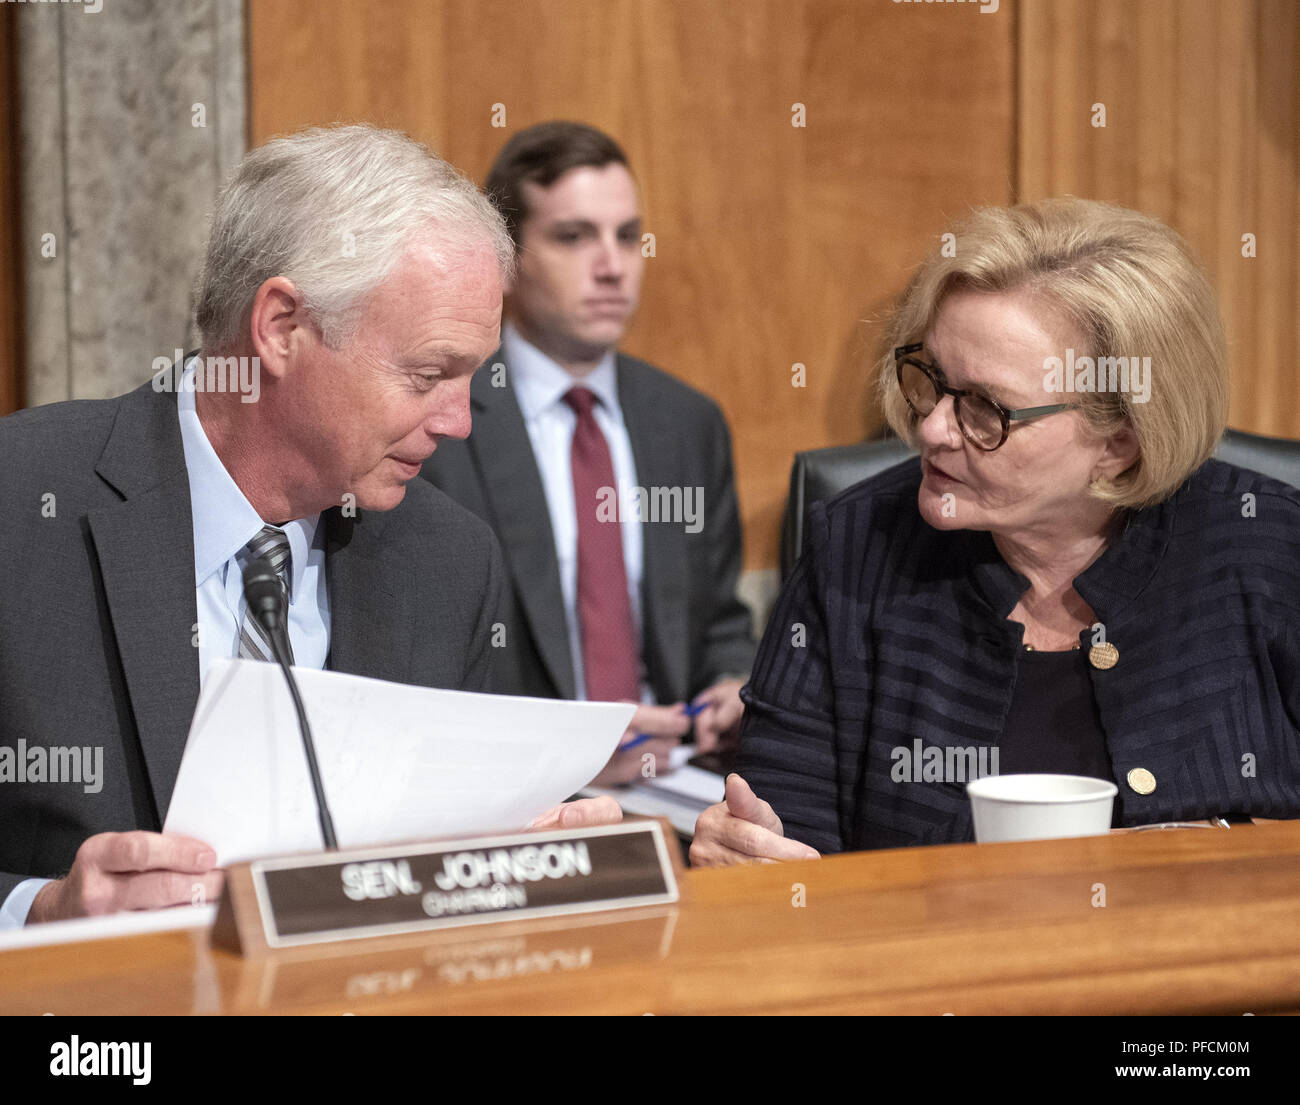 Washington, District of Columbia, USA. 21st Aug, 2018. United States Senator Ron Johnson, Chairman, US Senate Committee on Homeland Security & Governmental Affairs, left, and US Senator Claire McCaskill (Democrat of Missouri), ranking member, right, in discussion before hearing testimony on ''Examining CMS's Efforts to Fight Medicaid Fraud and Overpayments'' on Capitol Hill in Washington, DC on Tuesday, August 21, 2018 Credit: Ron Sachs/CNP/ZUMA Wire/Alamy Live News Stock Photo